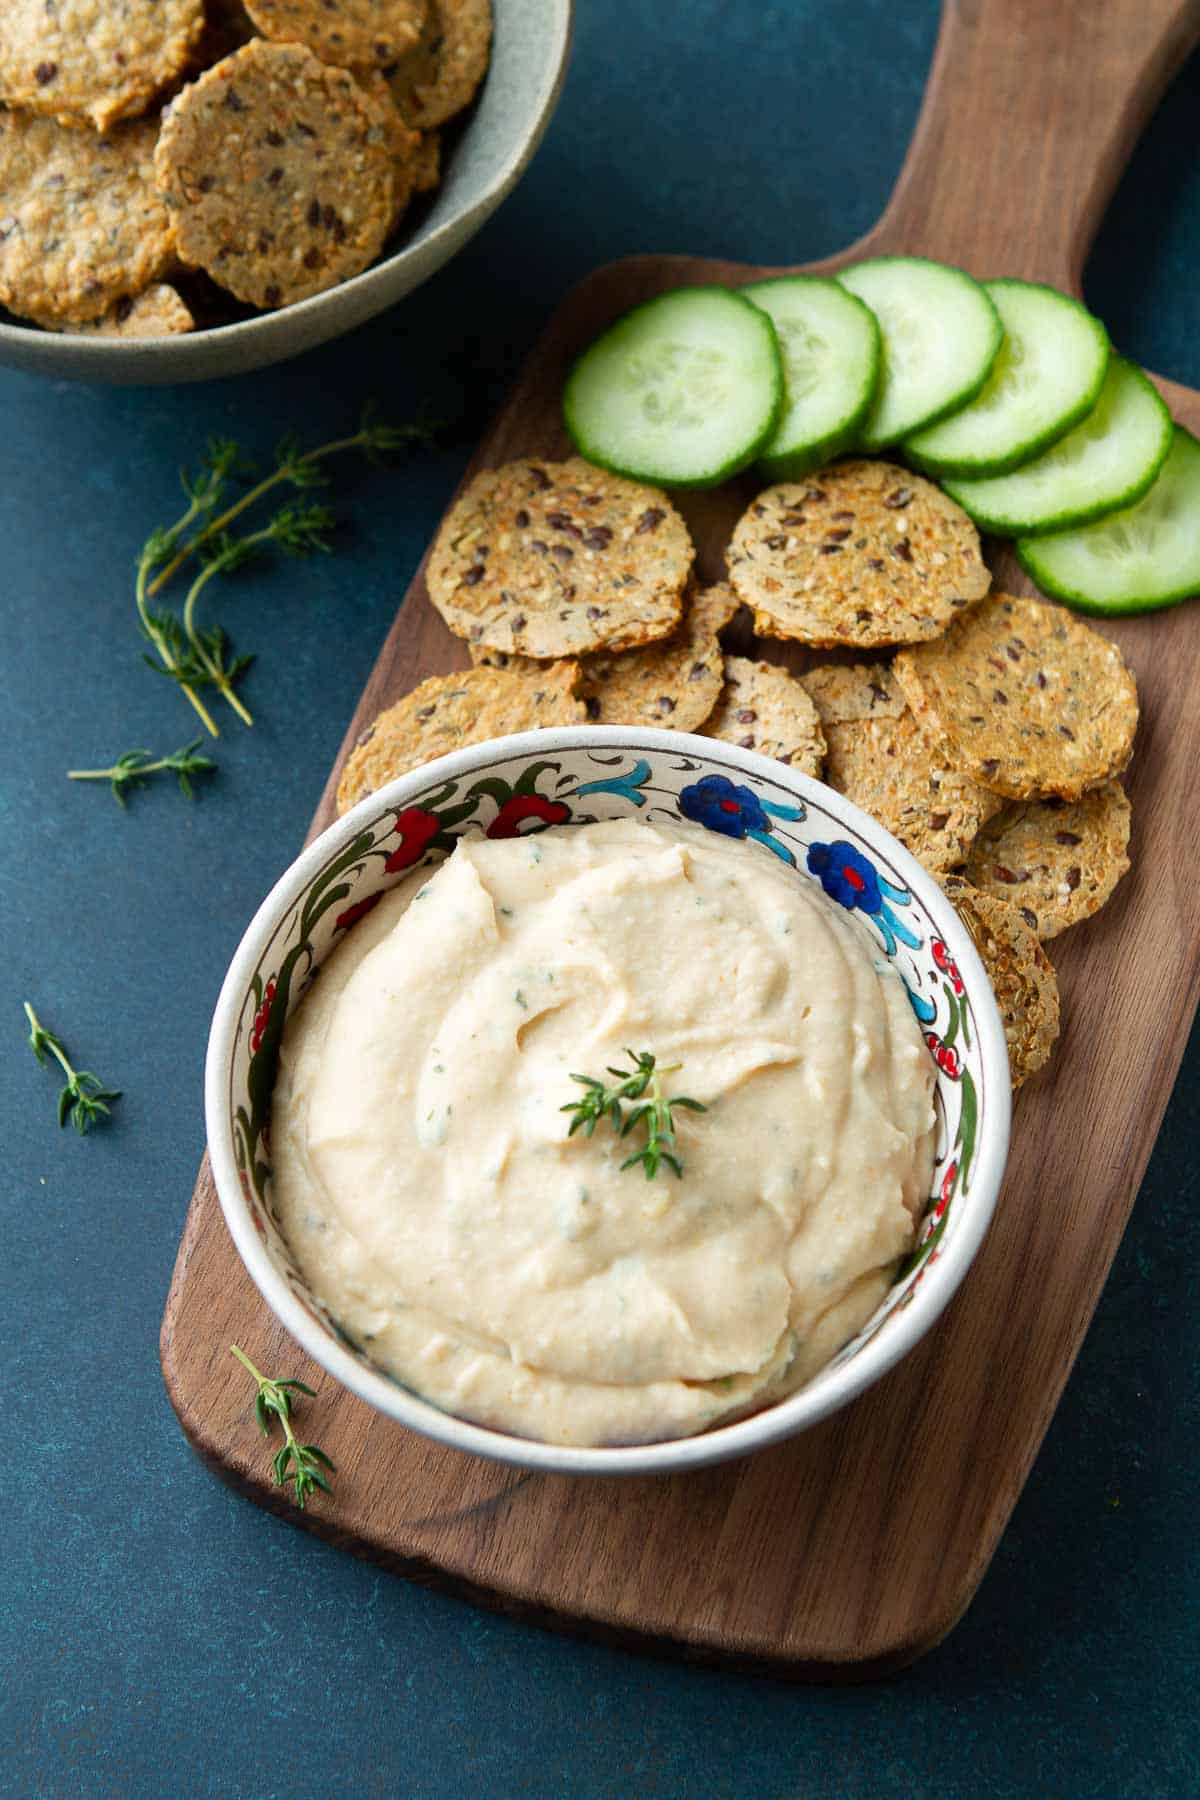 Bowl of white bean hummus, crackers and cucumber slices on a wooden board.